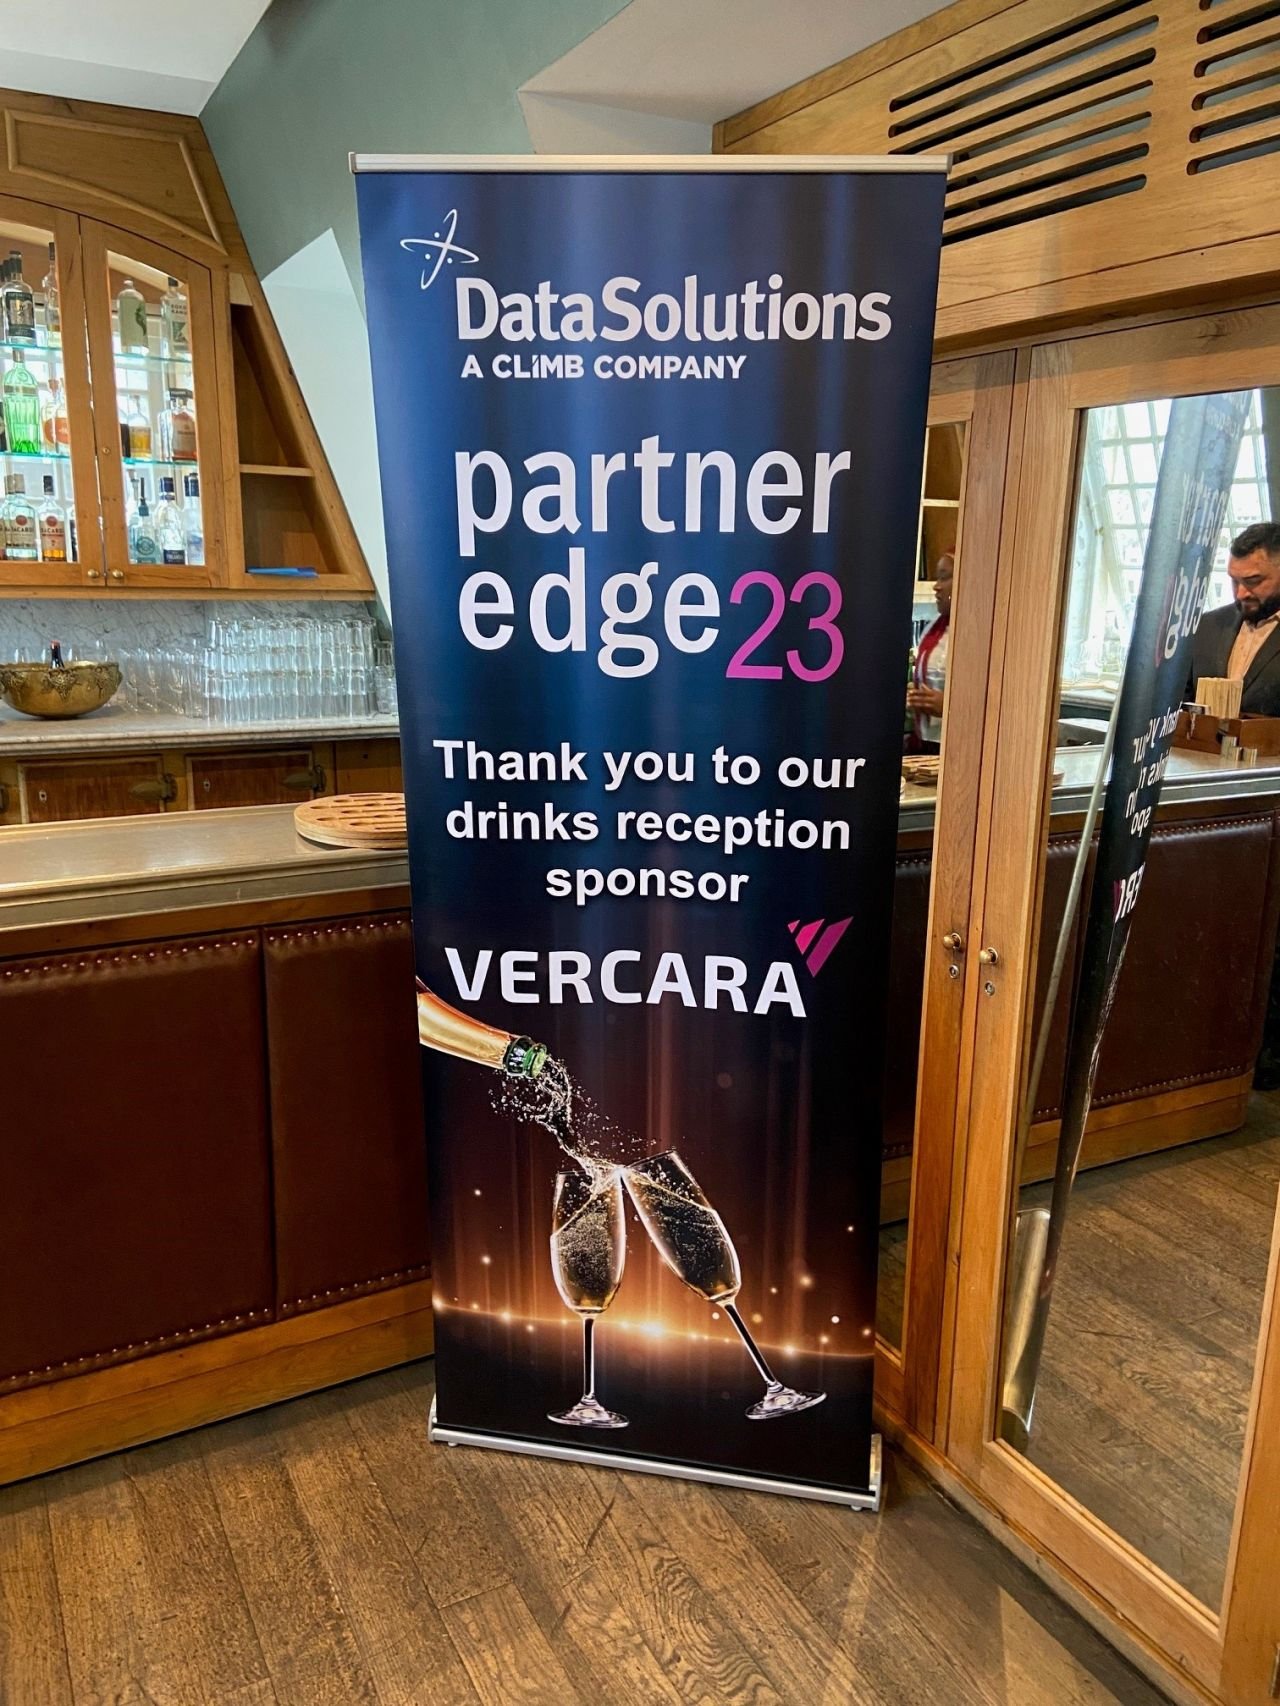 Drinks reception was sponsored by Vercara.